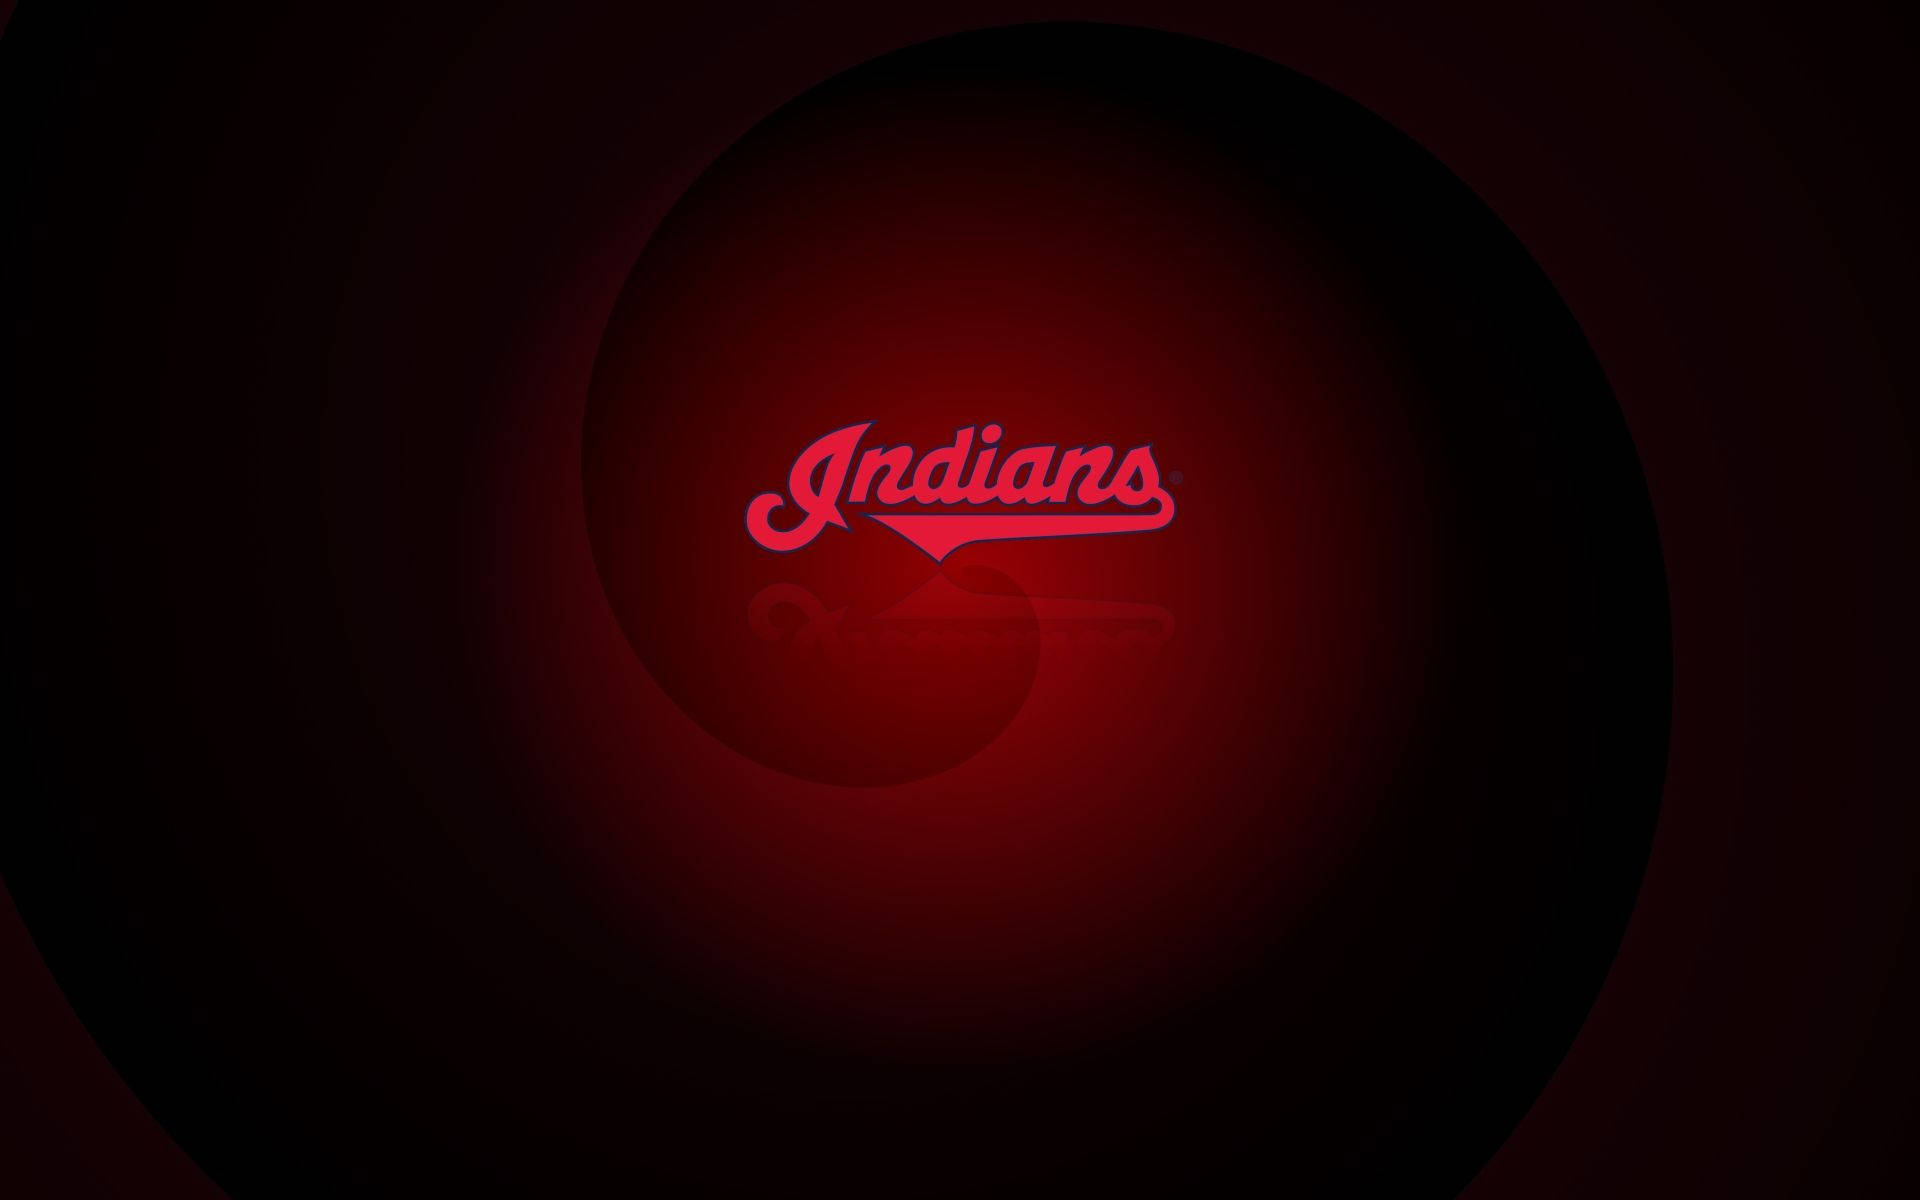 Cleveland Indians Wallpapers  Wallpaper Cave